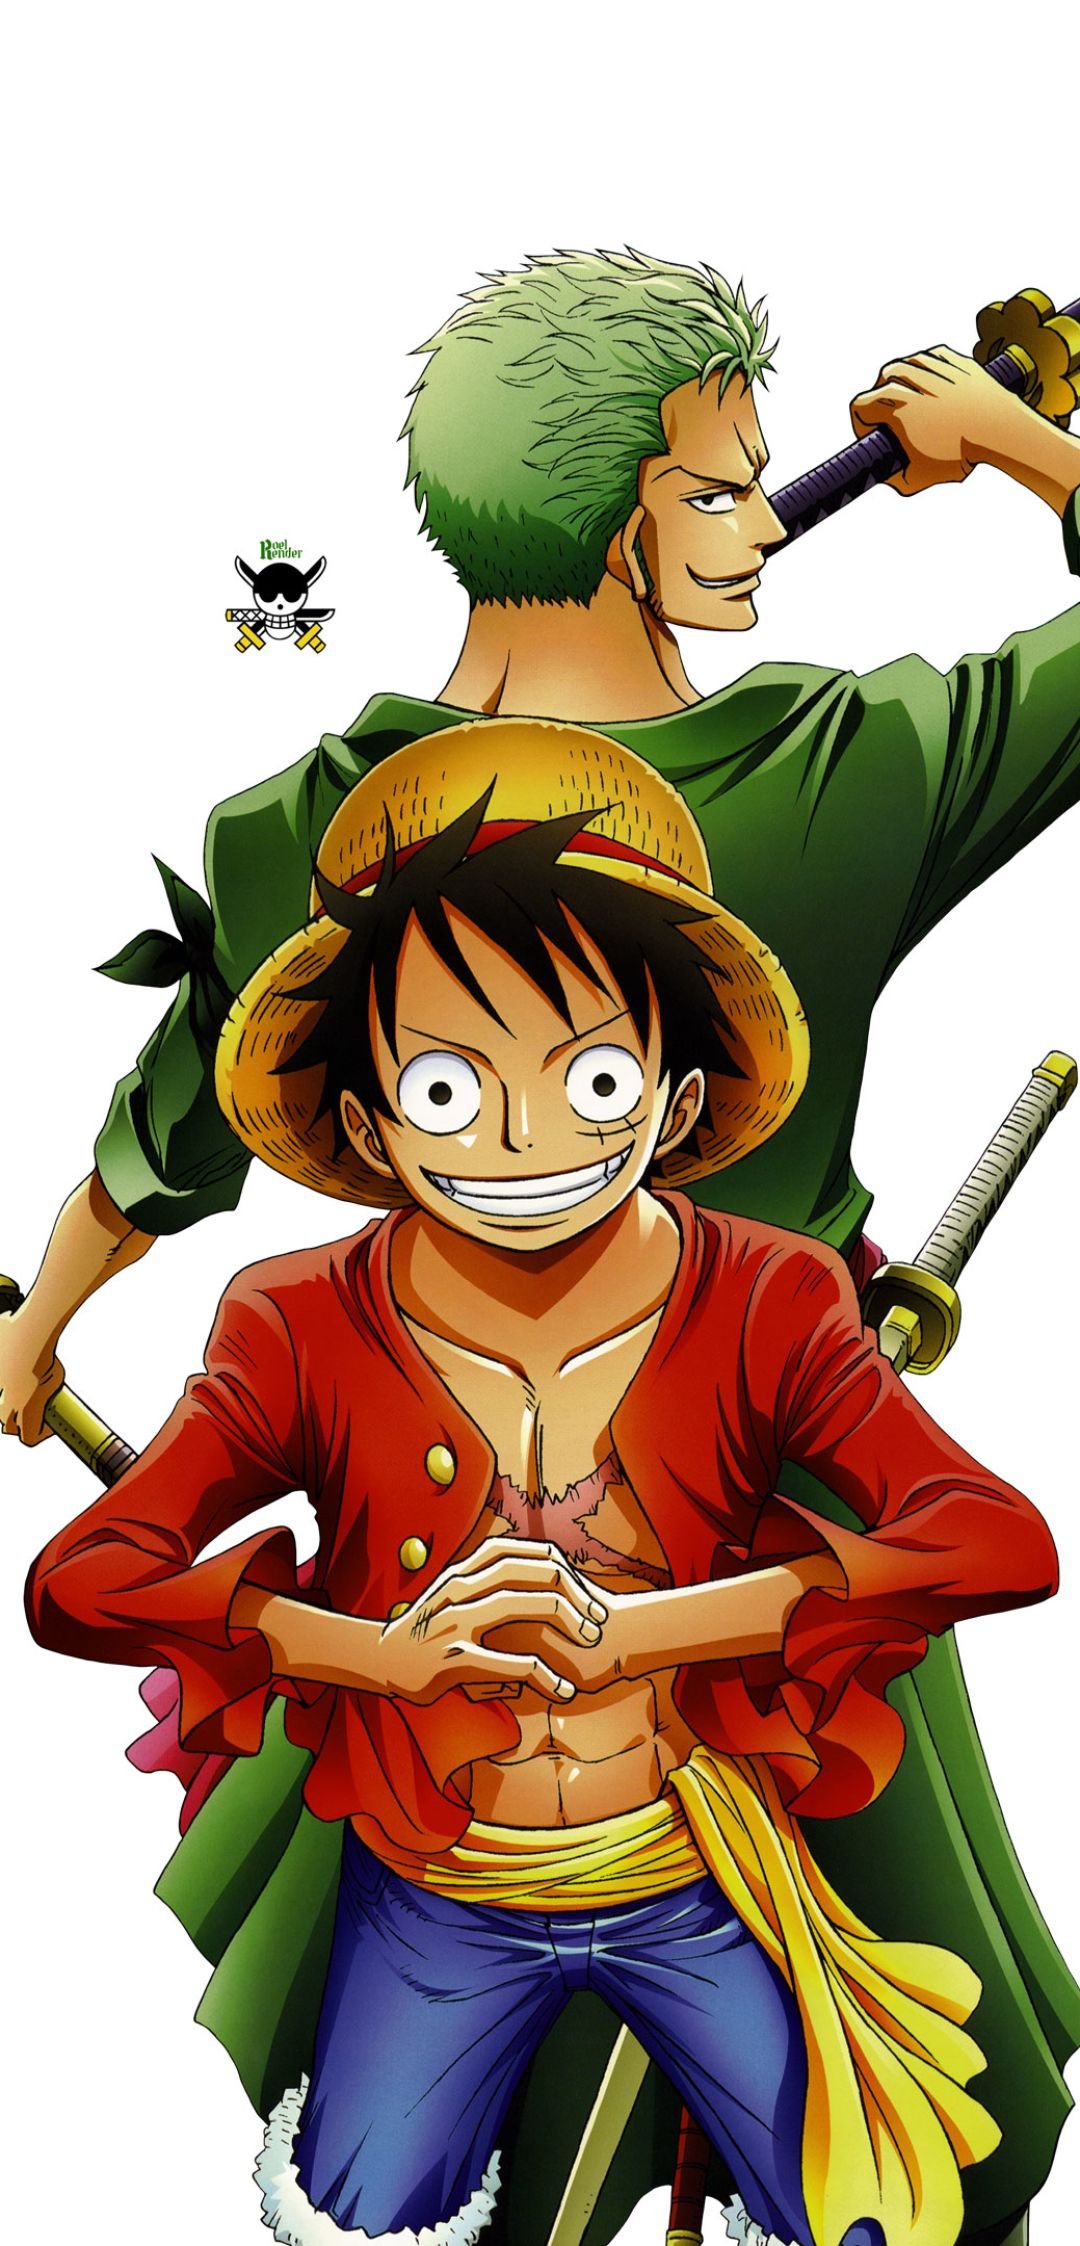 ONE PIECE ANIME LUFFY WALLPAPER IPHONE